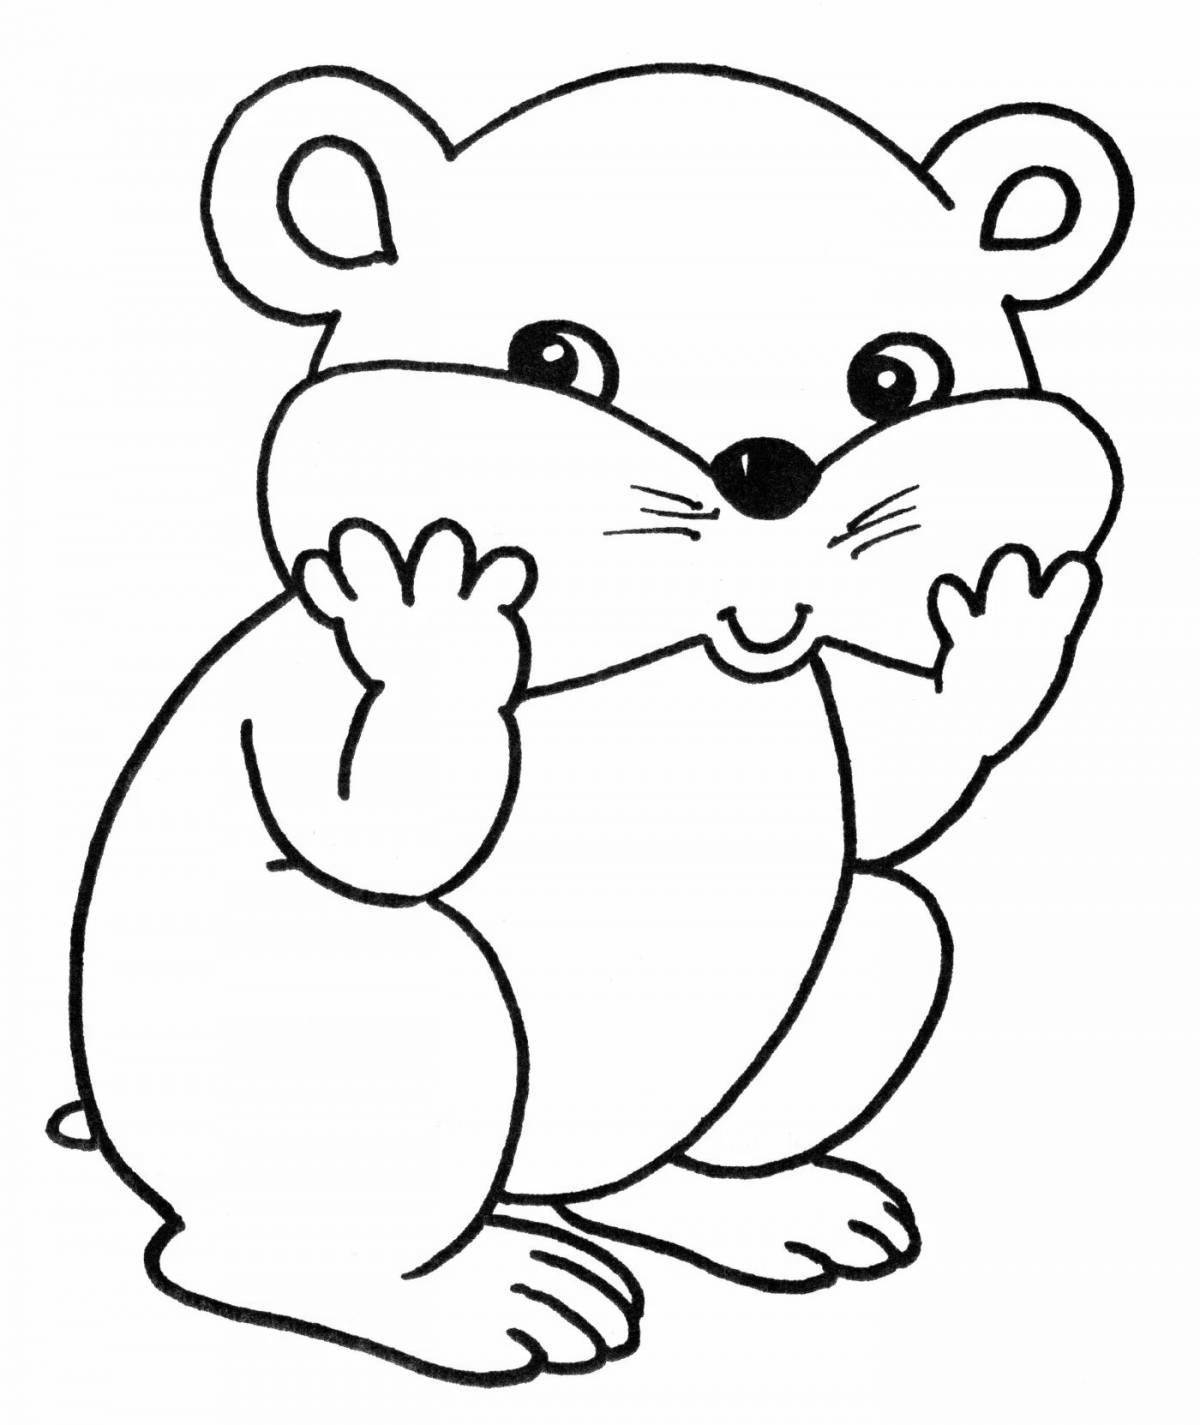 Naughty hamster coloring book